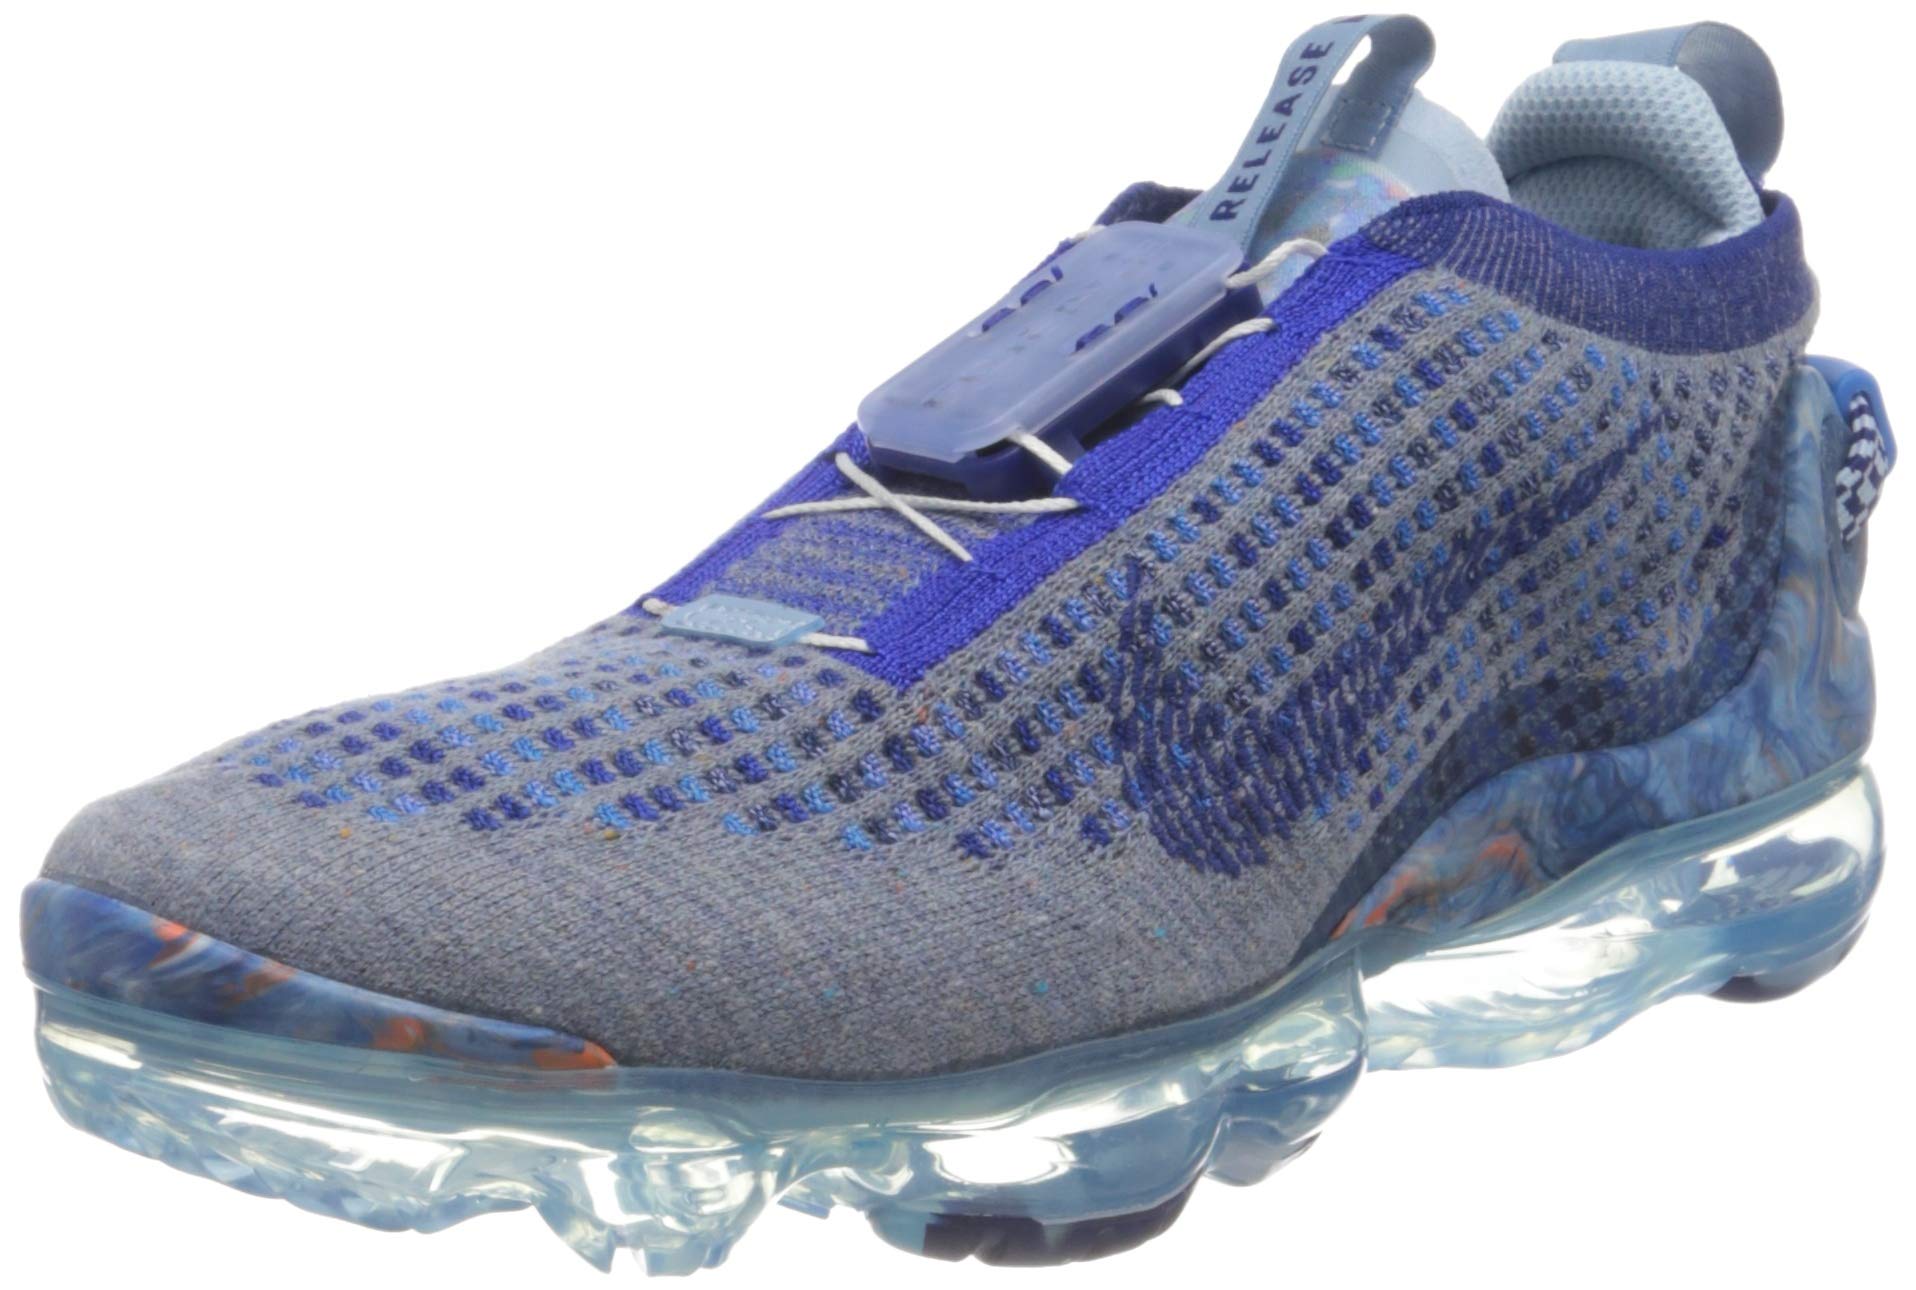 Nike Men's Air Vapormax 2020 Flyknit Running Shoes (7.5) - image 2 of 6